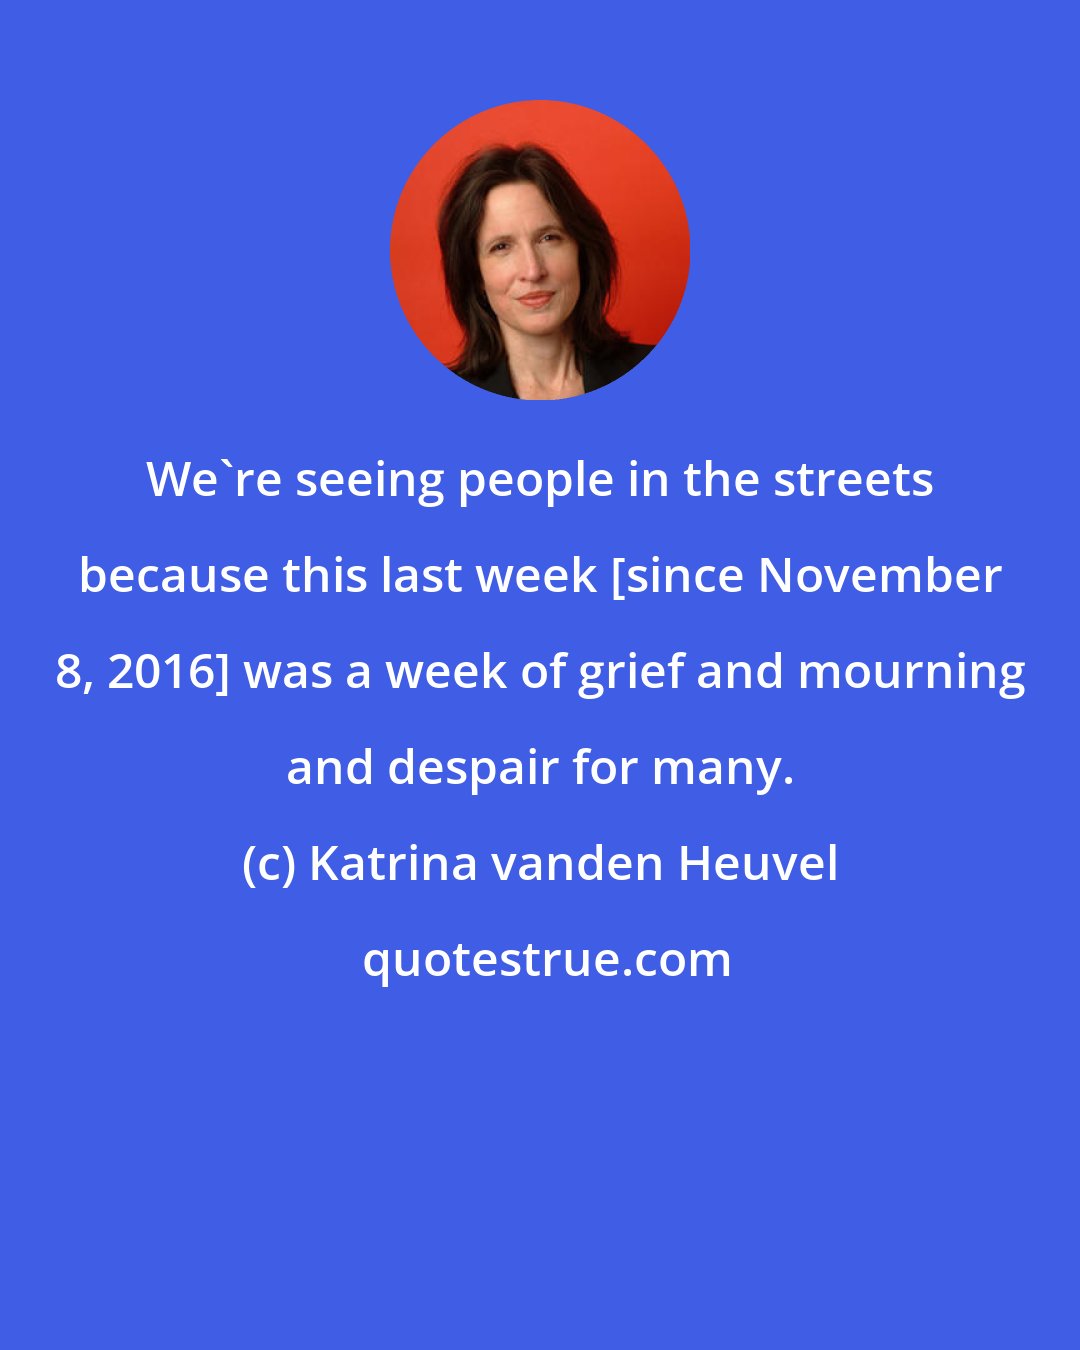 Katrina vanden Heuvel: We're seeing people in the streets because this last week [since November 8, 2016] was a week of grief and mourning and despair for many.